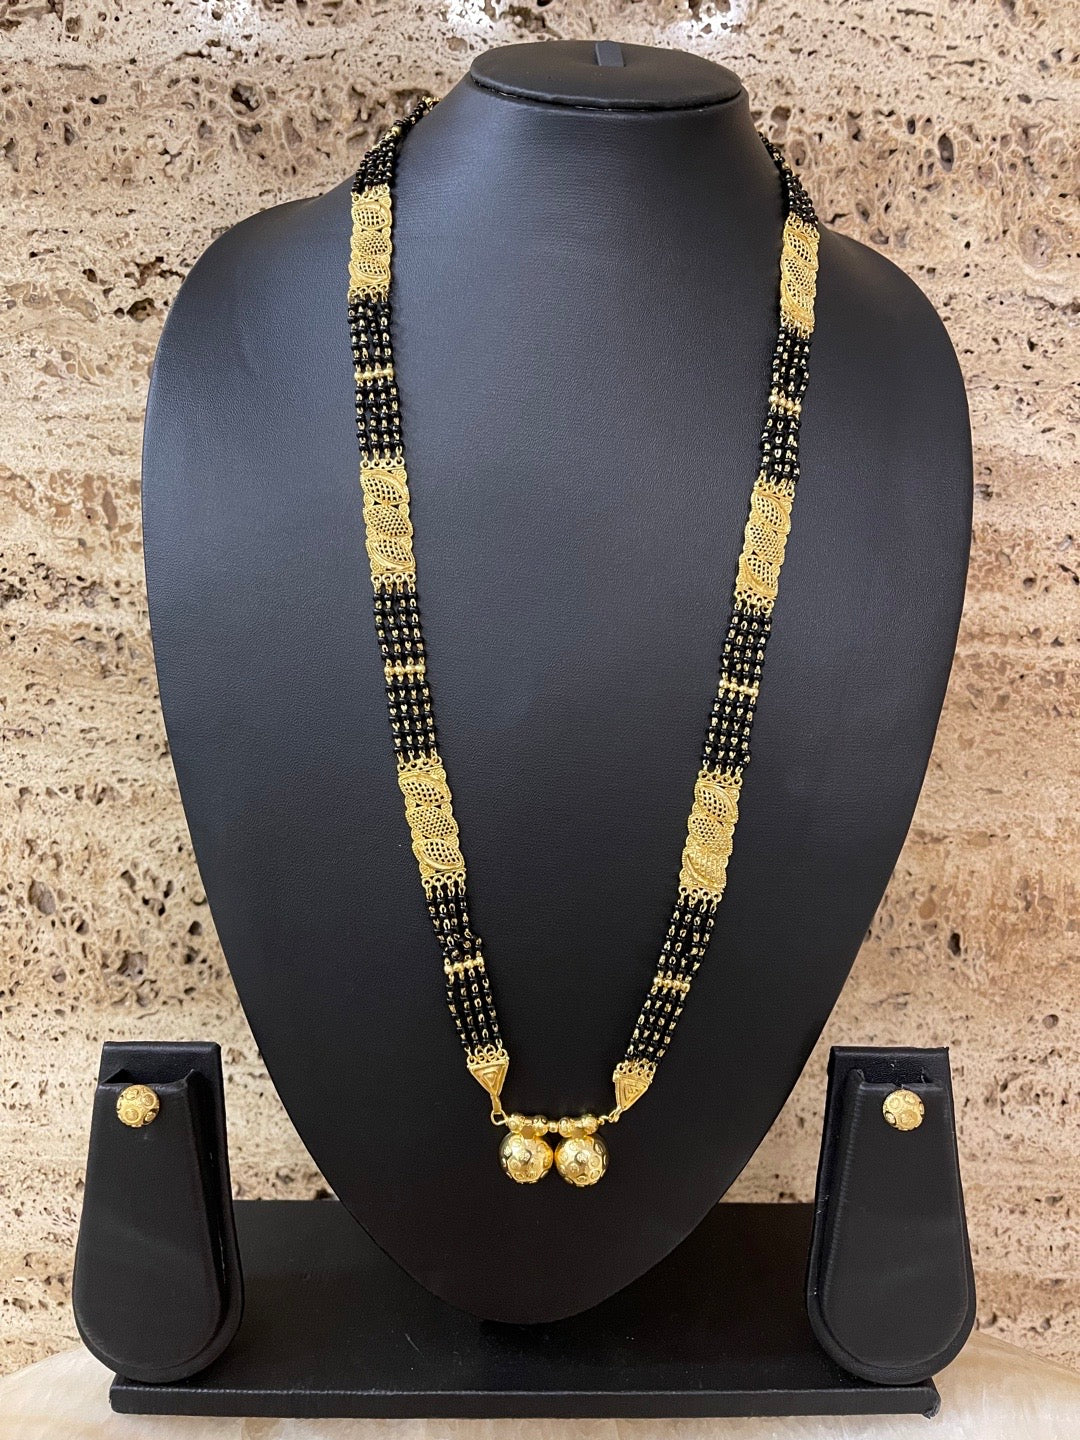 Long Mangalsutra designs with Earrings